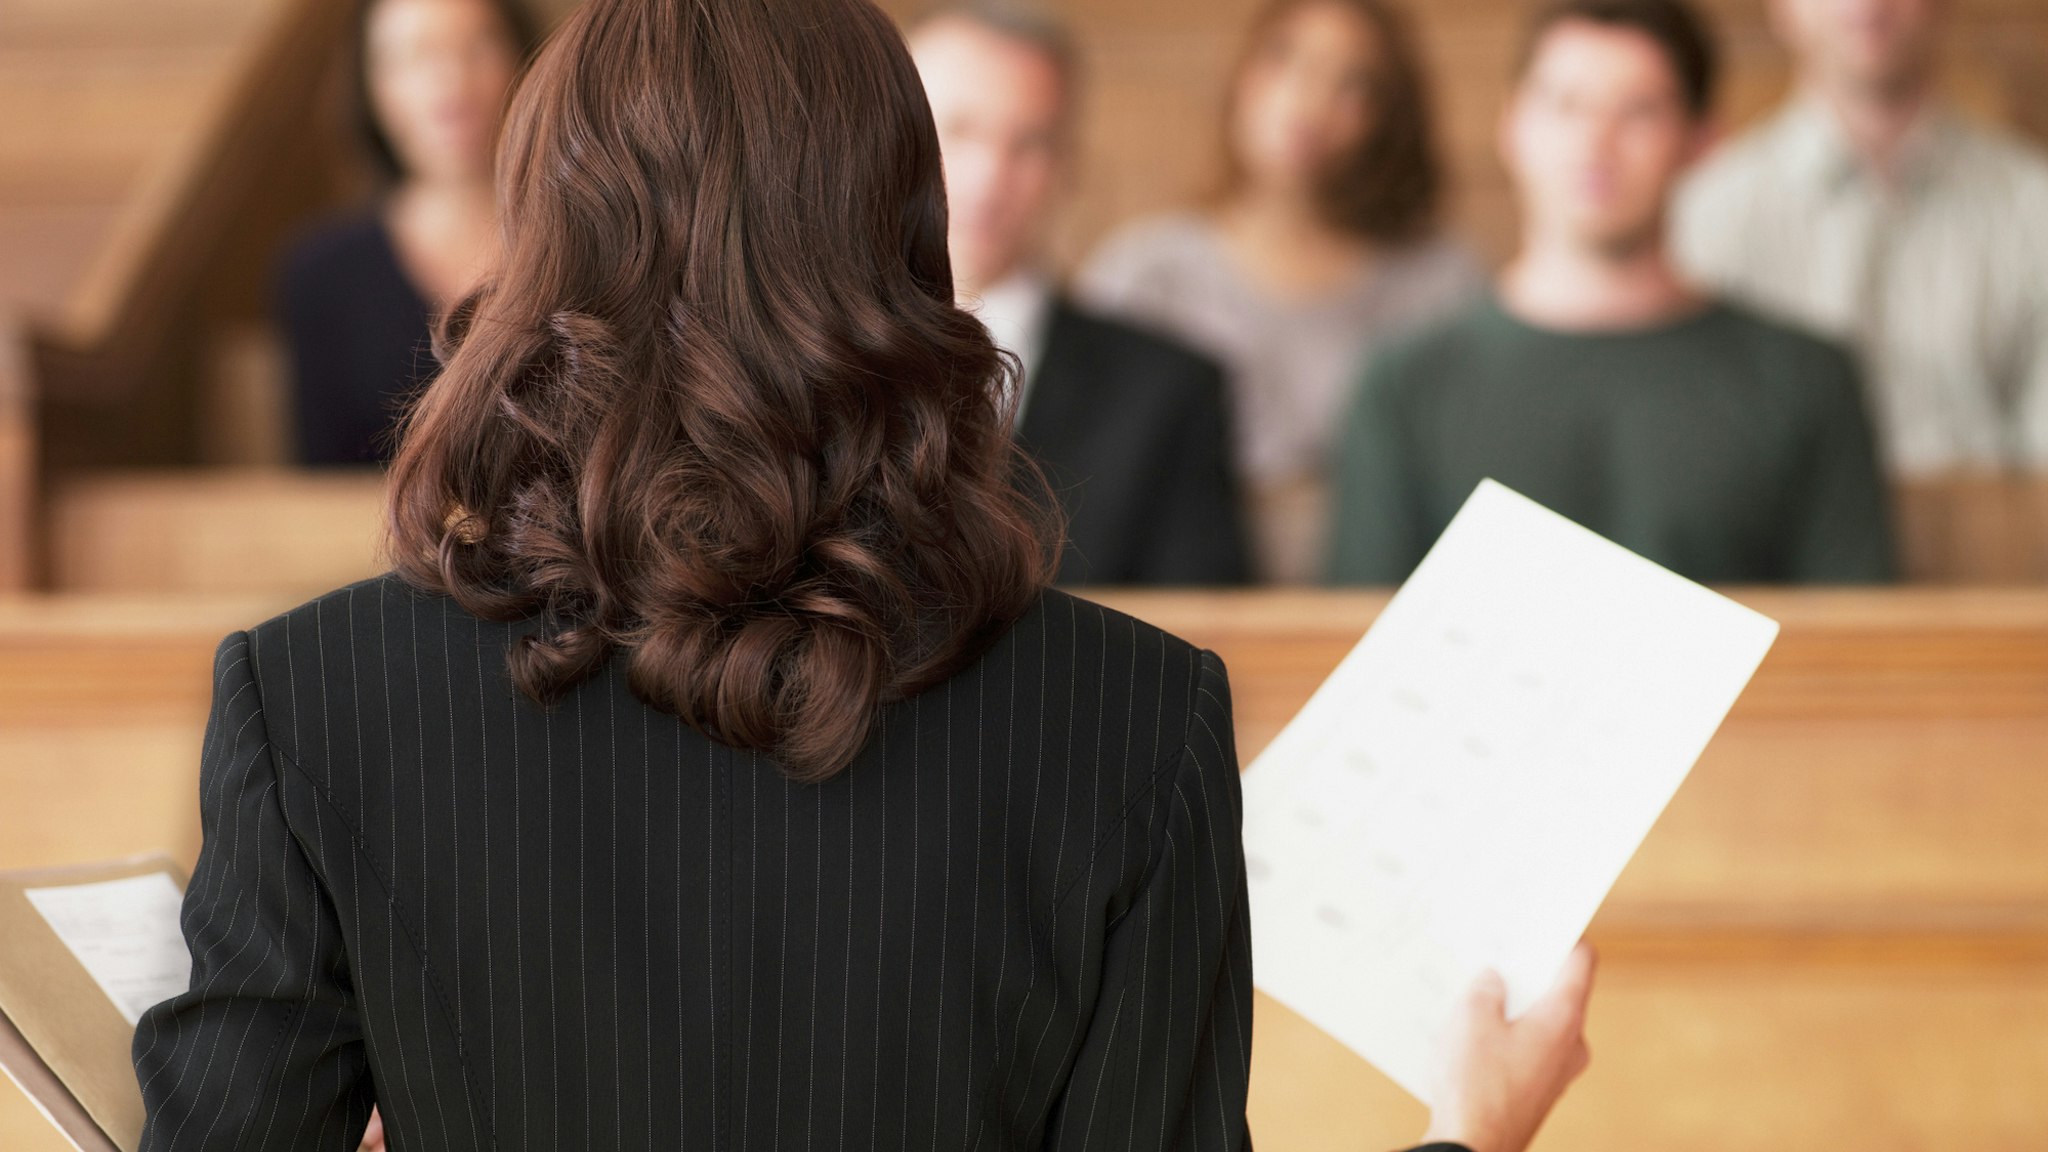 Lawyer holding document and speaking to jury in courtroom - stock photo